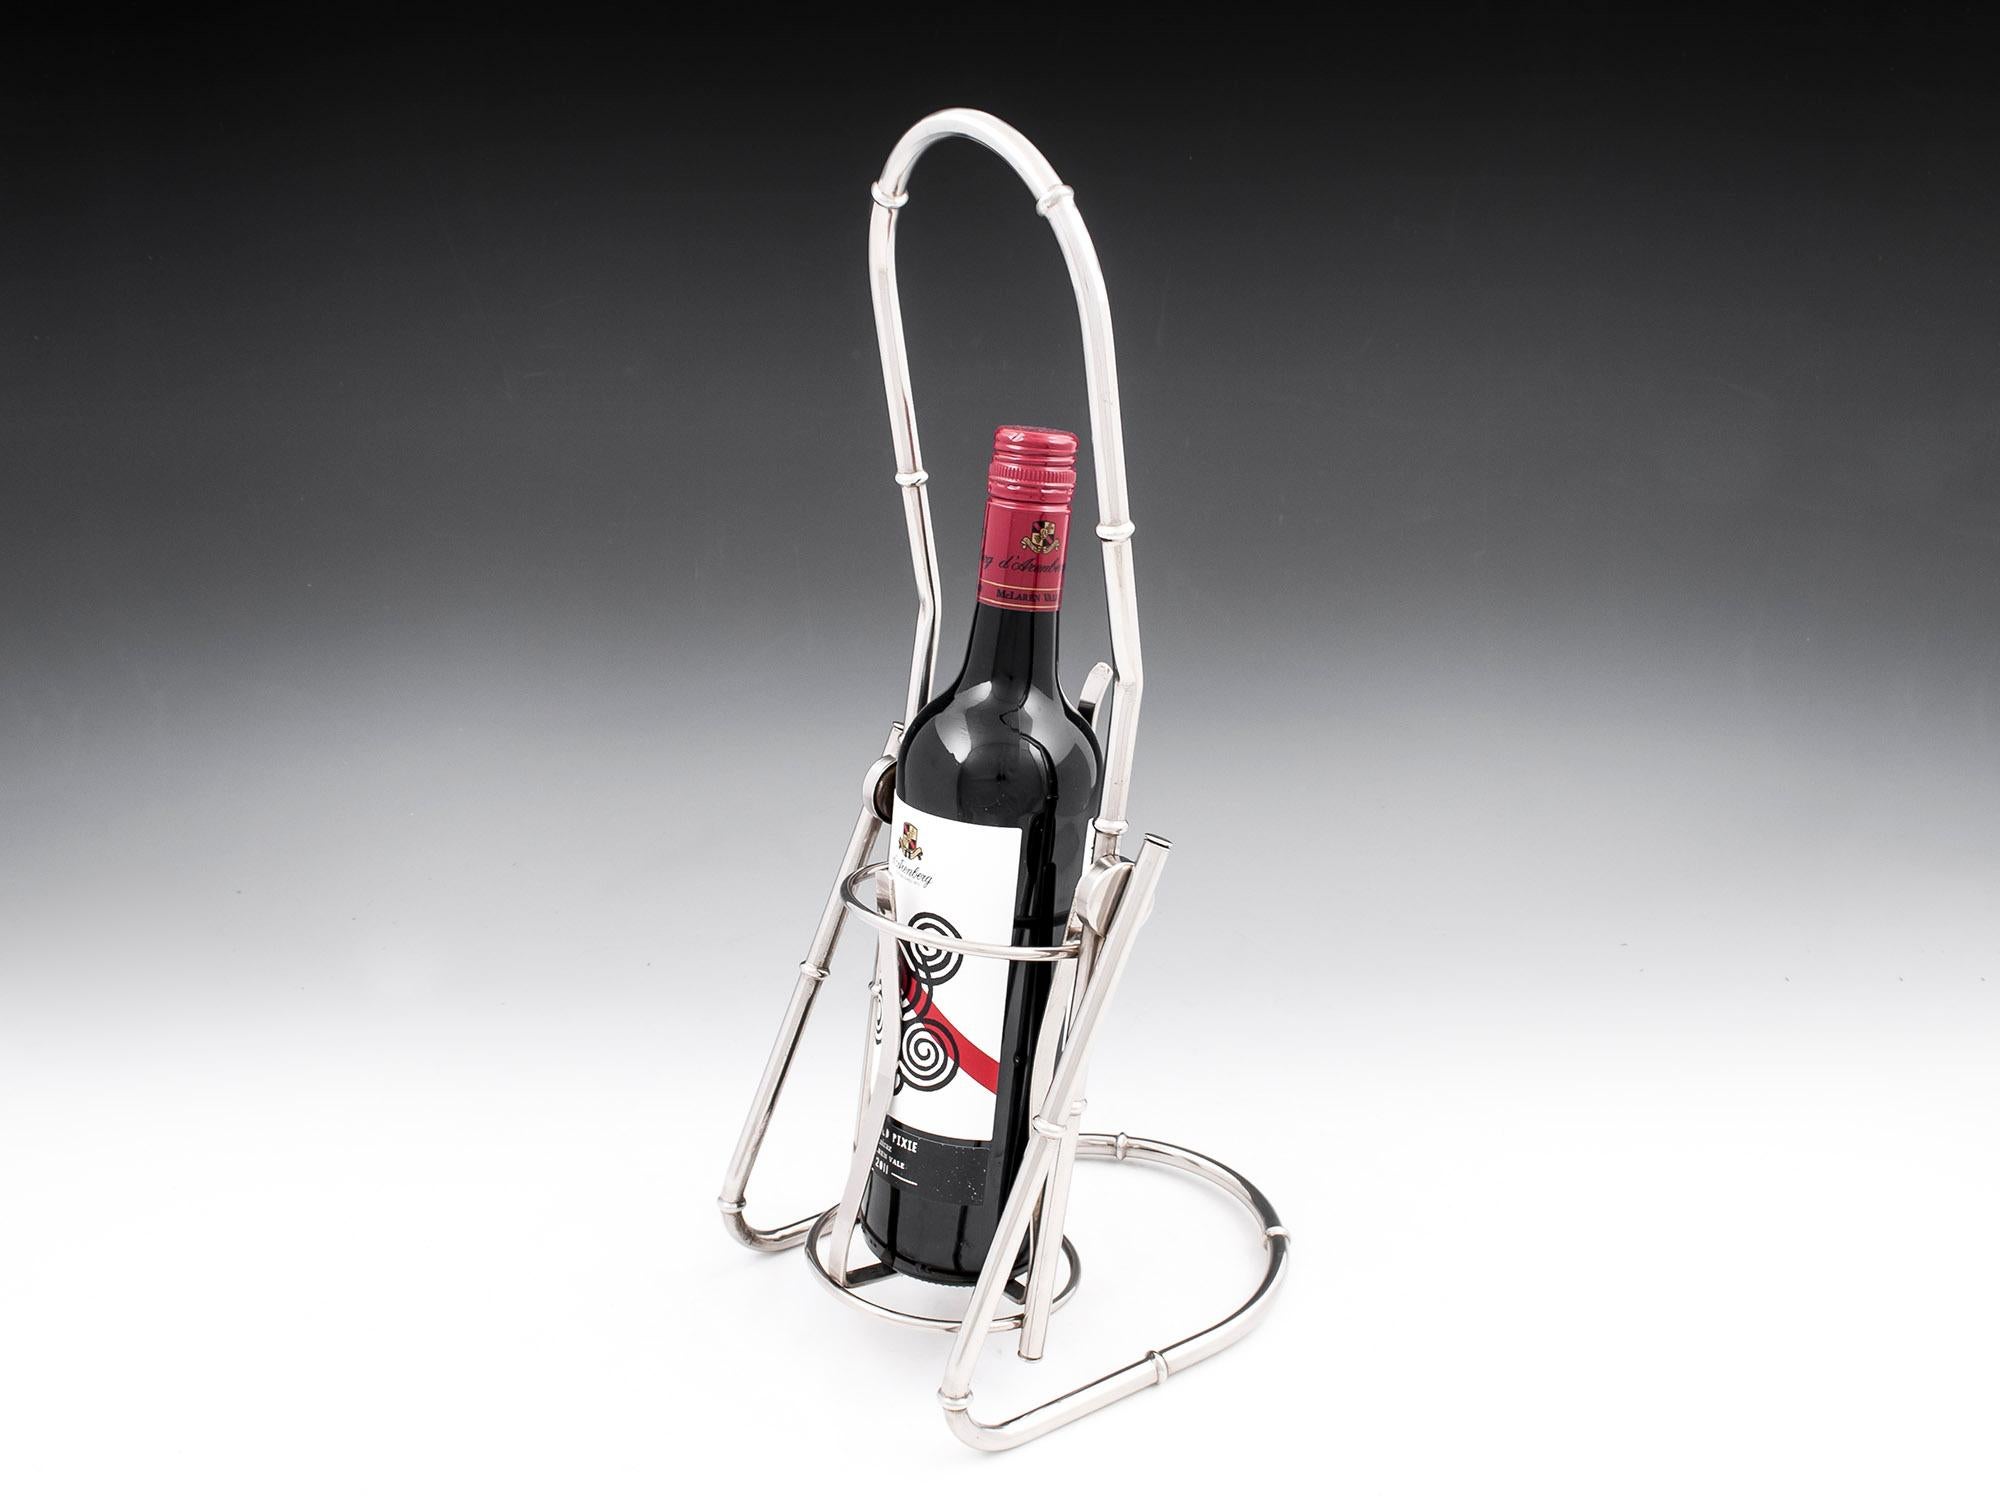 Jacques Adnet silver plated tilting wine cradle / holder with a realistic bamboo design. The cradle holds the wine bottle very securely without fear of the bottle coming loose when pouring in to a glass. 

Great stylish piece for the dinner party